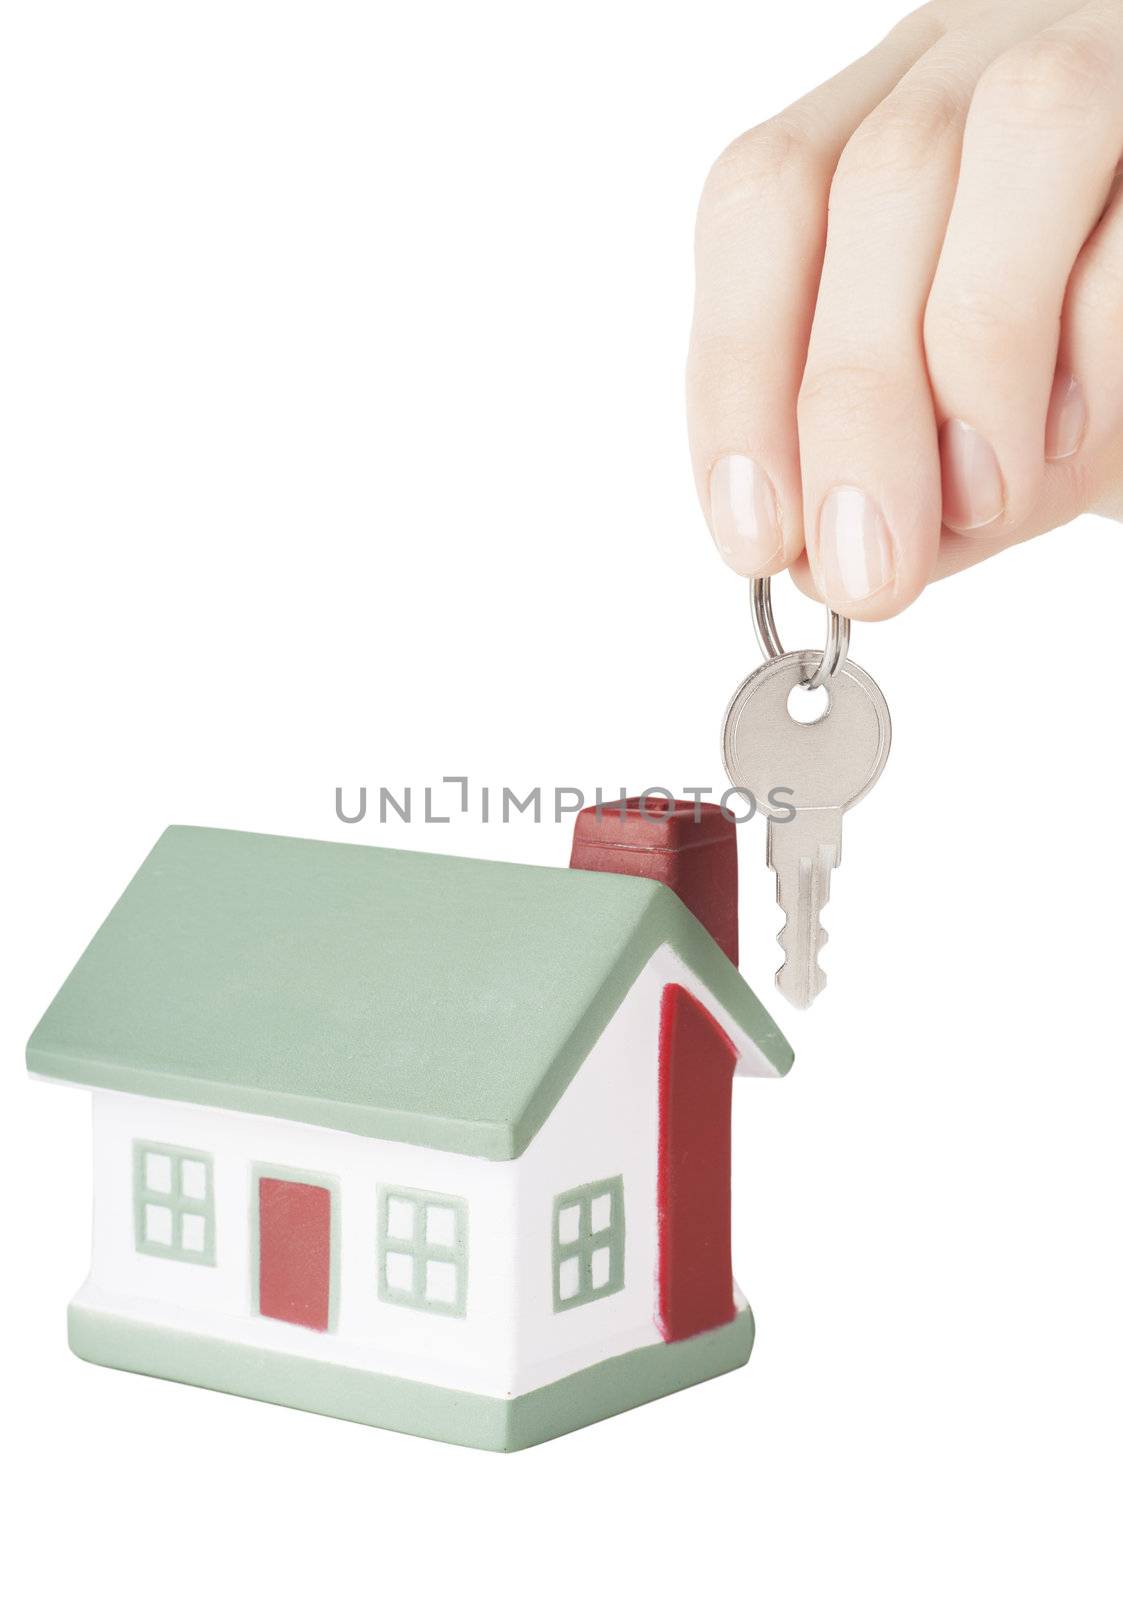 Little house toy and hand with key isolated over white background